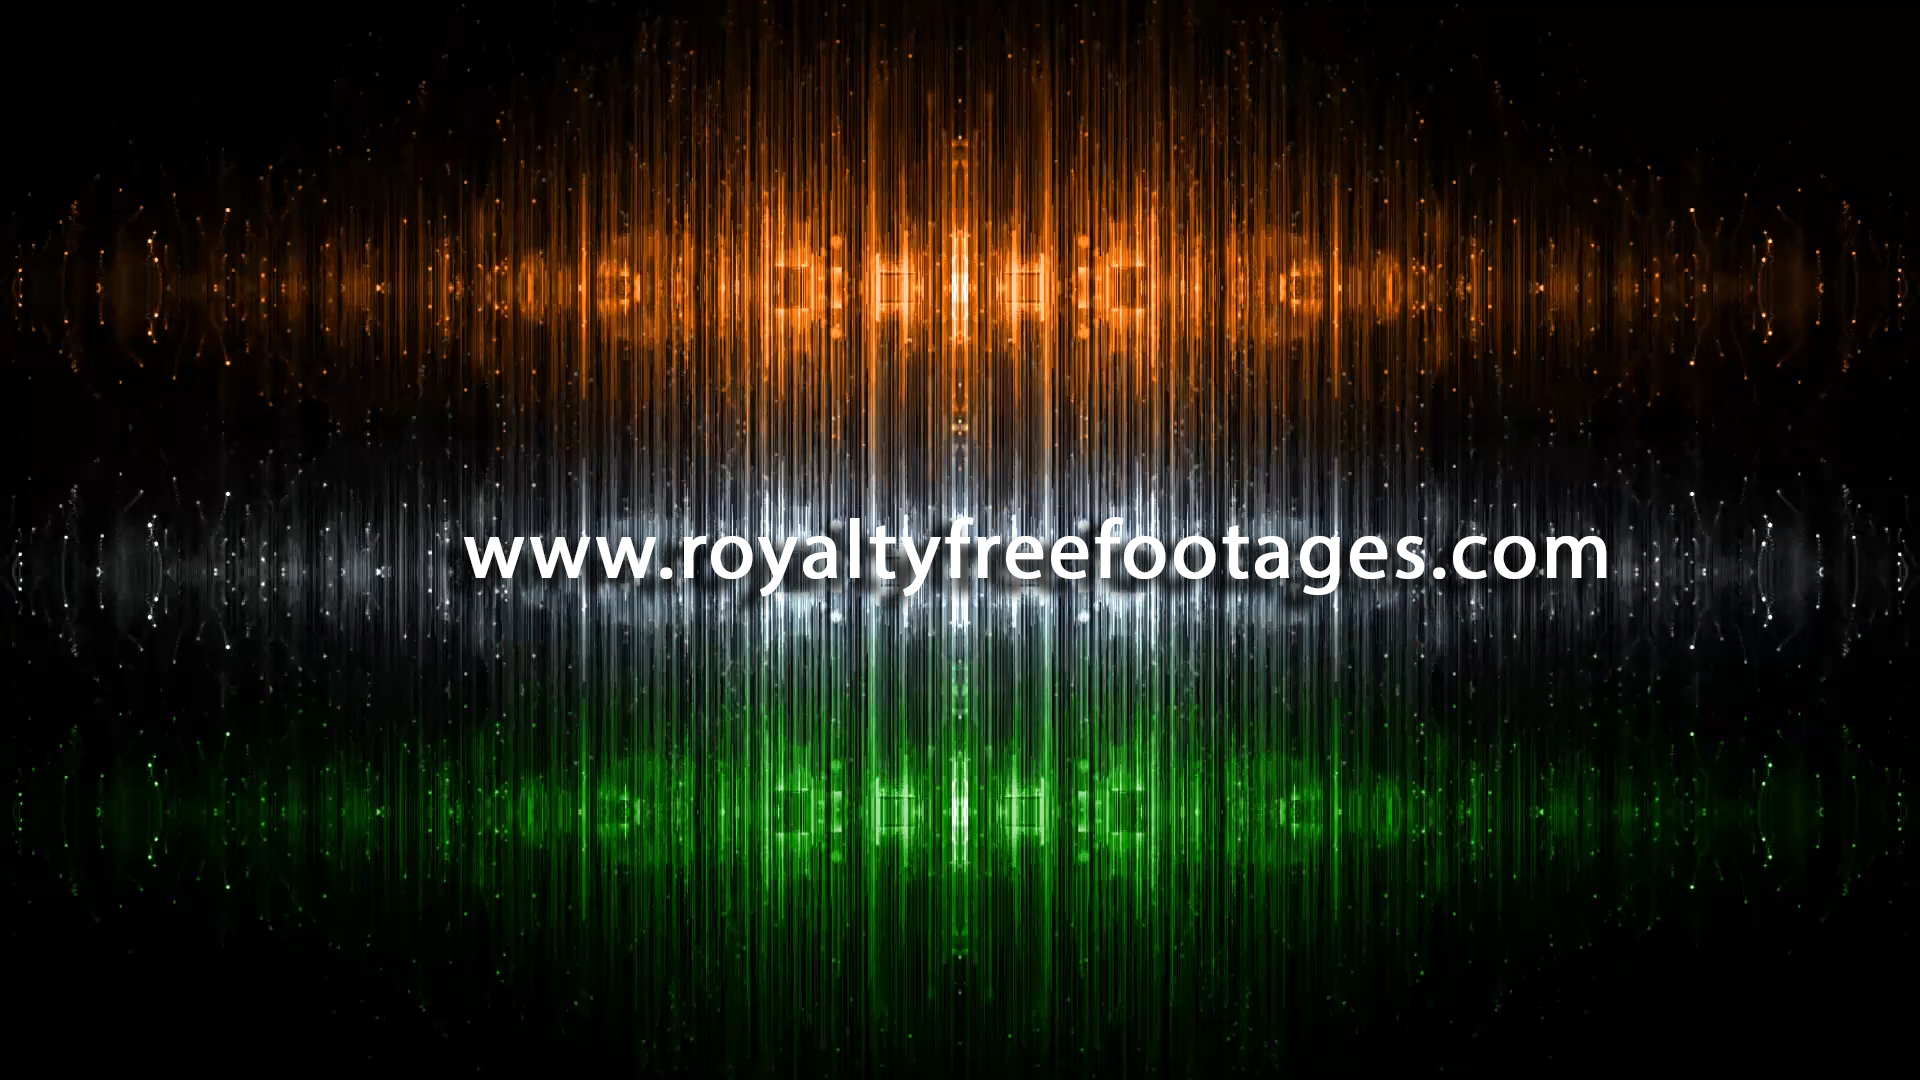 Royalty-free Indian flag background video downloads 